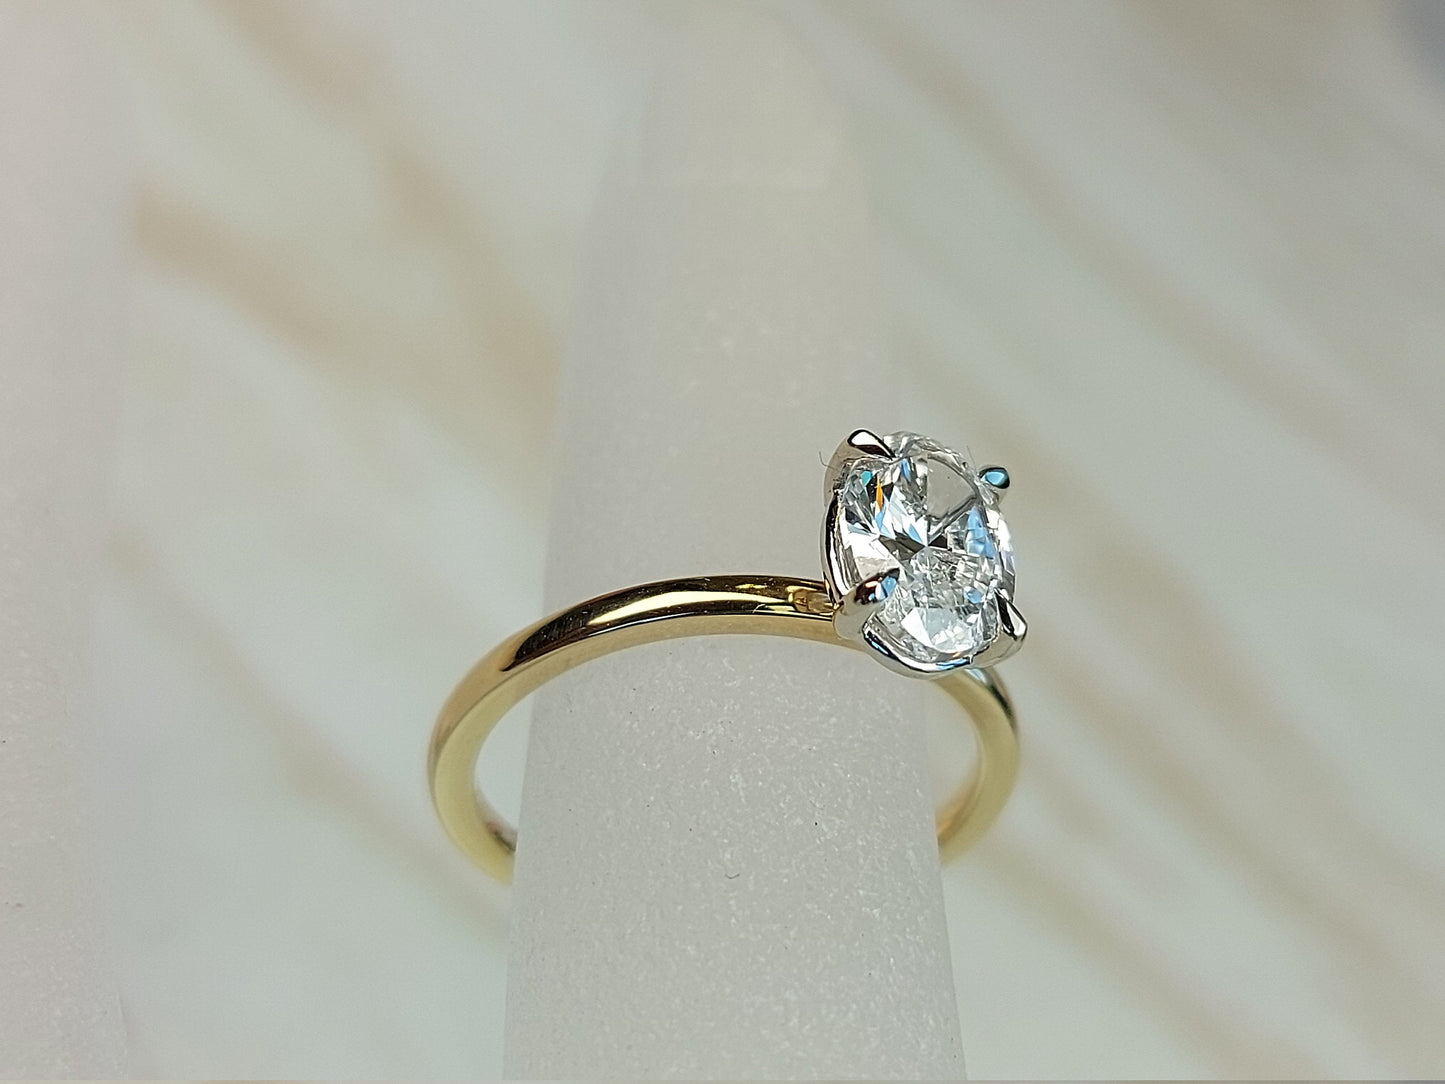 Lab grown Oval Cut solid gold diamond ring 1 Ct Modern Diamond Ring, Hailey Bieber ring Diamond Engagement Ring.